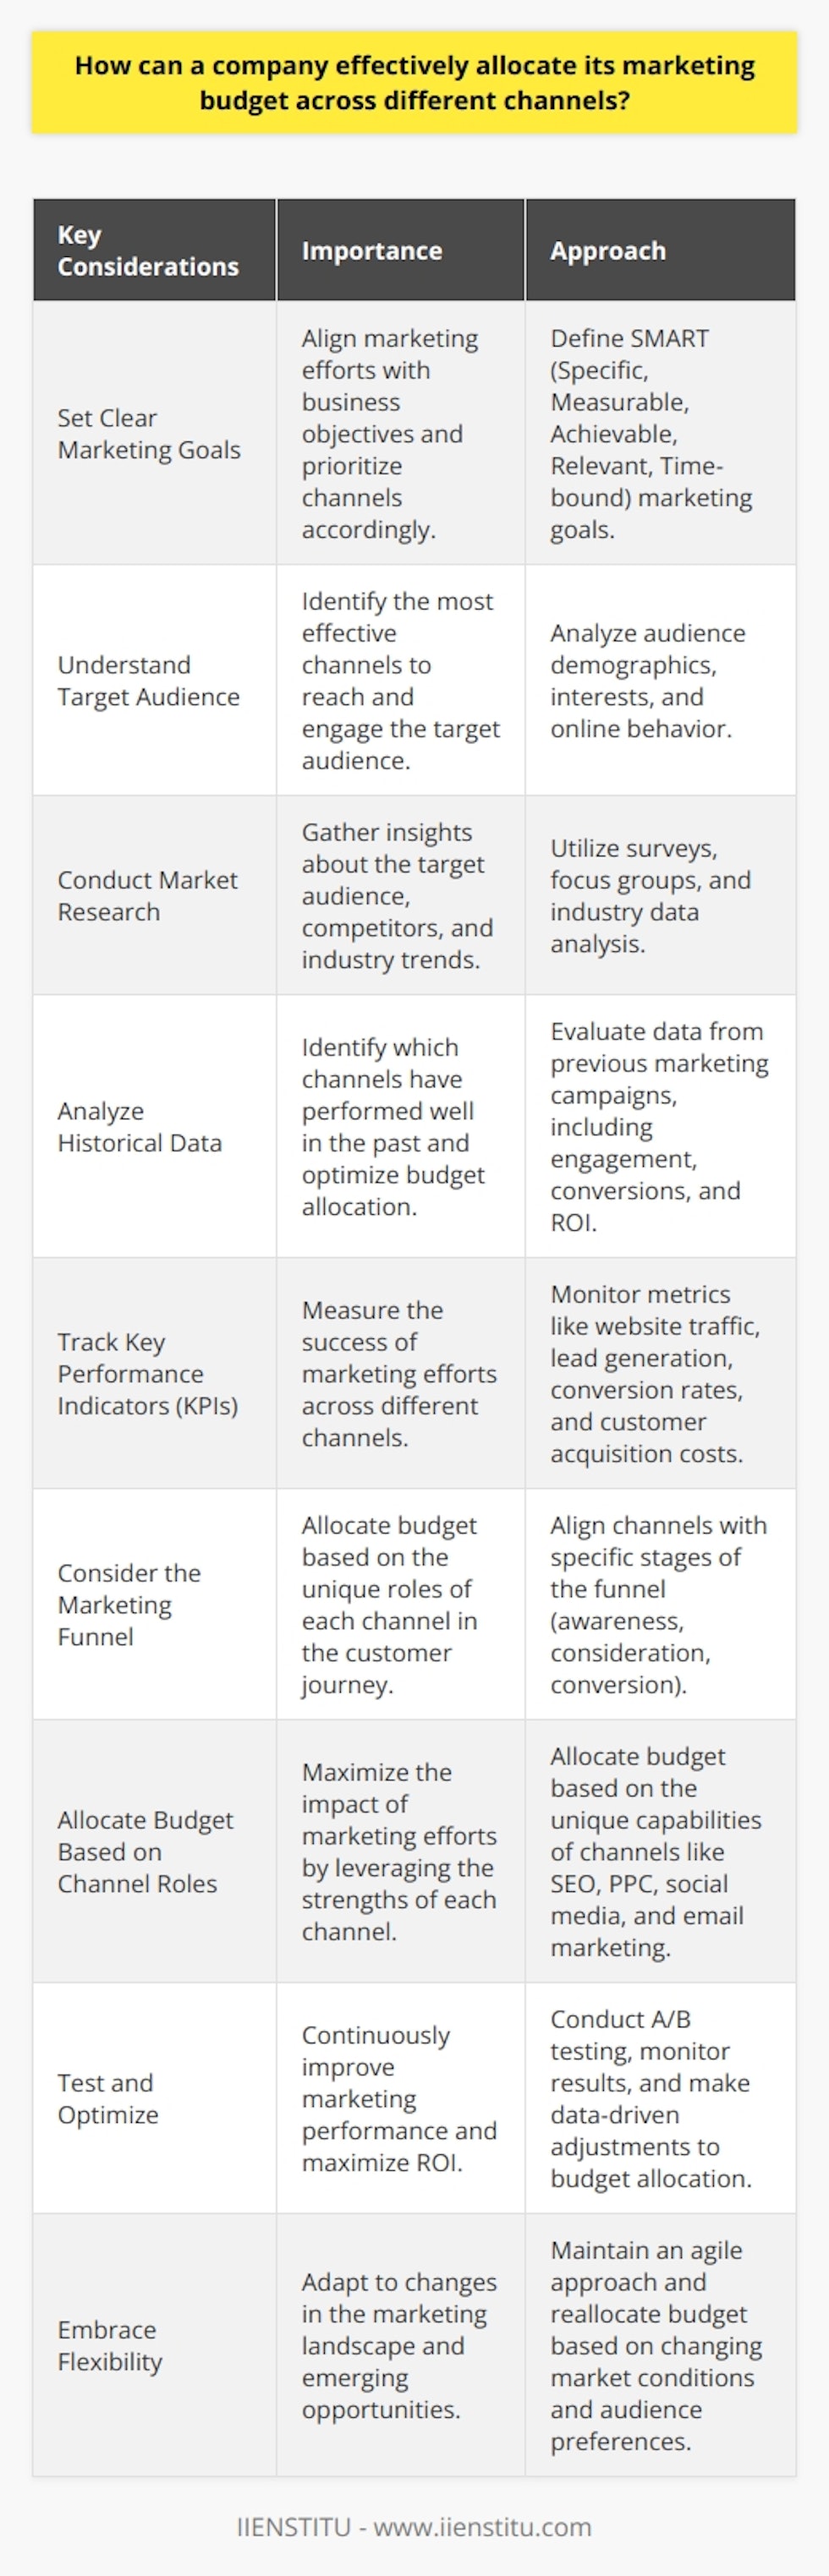 Effectively allocating a marketing budget across different channels is crucial for a companys success. It requires careful consideration of various factors, such as target audience, marketing goals, and channel performance. To make informed decisions, companies should conduct thorough research and analyze data from previous campaigns. This data can provide valuable insights into which channels yield the best return on investment (ROI) and engage the target audience most effectively. Set Clear Marketing Goals Before allocating the marketing budget, companies must define their marketing goals. These goals should align with the overall business objectives and be specific, measurable, achievable, relevant, and time-bound (SMART). Clear goals help prioritize channels and determine the appropriate budget allocation for each. Understand Your Target Audience Knowing your target audience is essential for selecting the most effective marketing channels. Different audiences have different preferences and behaviors when it comes to consuming content and engaging with brands. By understanding your audiences demographics, interests, and online habits, you can identify the channels that are most likely to reach and resonate with them. Conduct Market Research Market research helps companies gather valuable information about their target audience and competitors. It can involve surveys, focus groups, and analyzing industry trends. This research provides insights into the most effective channels for reaching the target audience and helps identify opportunities for differentiation from competitors. Analyze Historical Data Analyzing data from previous marketing campaigns is crucial for making informed budget allocation decisions. This data can reveal which channels have performed well in the past, driving the most engagement, conversions, and ROI. By identifying patterns and trends, companies can optimize their budget allocation and focus on the channels that have proven to be most effective. Track Key Performance Indicators (KPIs) Monitoring KPIs is essential for measuring the success of marketing efforts across different channels. KPIs can include metrics such as website traffic, lead generation, conversion rates, and customer acquisition costs. By regularly tracking and analyzing these KPIs, companies can identify which channels are performing well and adjust their budget allocation accordingly. Consider the Marketing Funnel The marketing funnel represents the customer journey from awareness to conversion. Different marketing channels play distinct roles at each stage of the funnel. For example, social media and content marketing may be more effective for building brand awareness, while email marketing and retargeting ads may be better suited for nurturing leads and driving conversions. Companies should allocate their budget based on the specific goals and objectives of each stage of the funnel. Allocate Budget Based on Channel Roles Each marketing channel serves a unique purpose and has its strengths and weaknesses. Search engine optimization (SEO) and pay-per-click (PPC) advertising, for instance, are effective for driving website traffic and generating leads. Social media, on the other hand, is valuable for building brand awareness and engaging with the audience. By understanding the roles and capabilities of each channel, companies can allocate their budget in a way that maximizes the impact of their marketing efforts. Test and Optimize Marketing budget allocation is not a one-time decision. It requires continuous testing, monitoring, and optimization. Companies should regularly assess the performance of each channel and make data-driven adjustments to their budget allocation. A/B testing can help identify the most effective ad copy, targeting options, and landing pages for each channel. By continuously refining and optimizing their approach, companies can maximize the ROI of their marketing budget. Embrace Flexibility The marketing landscape is constantly evolving, with new channels and technologies emerging regularly. Companies should maintain a flexible approach to budget allocation, allowing for adjustments based on changing market conditions, audience preferences, and emerging opportunities. By staying agile and adaptable, companies can quickly respond to changes and allocate their budget in a way that maximizes their marketing impact. In conclusion, effectively allocating a marketing budget across different channels requires a strategic and data-driven approach. By setting clear goals, understanding the target audience, analyzing historical data, considering the marketing funnel, and embracing flexibility, companies can optimize their budget allocation and achieve better marketing results.